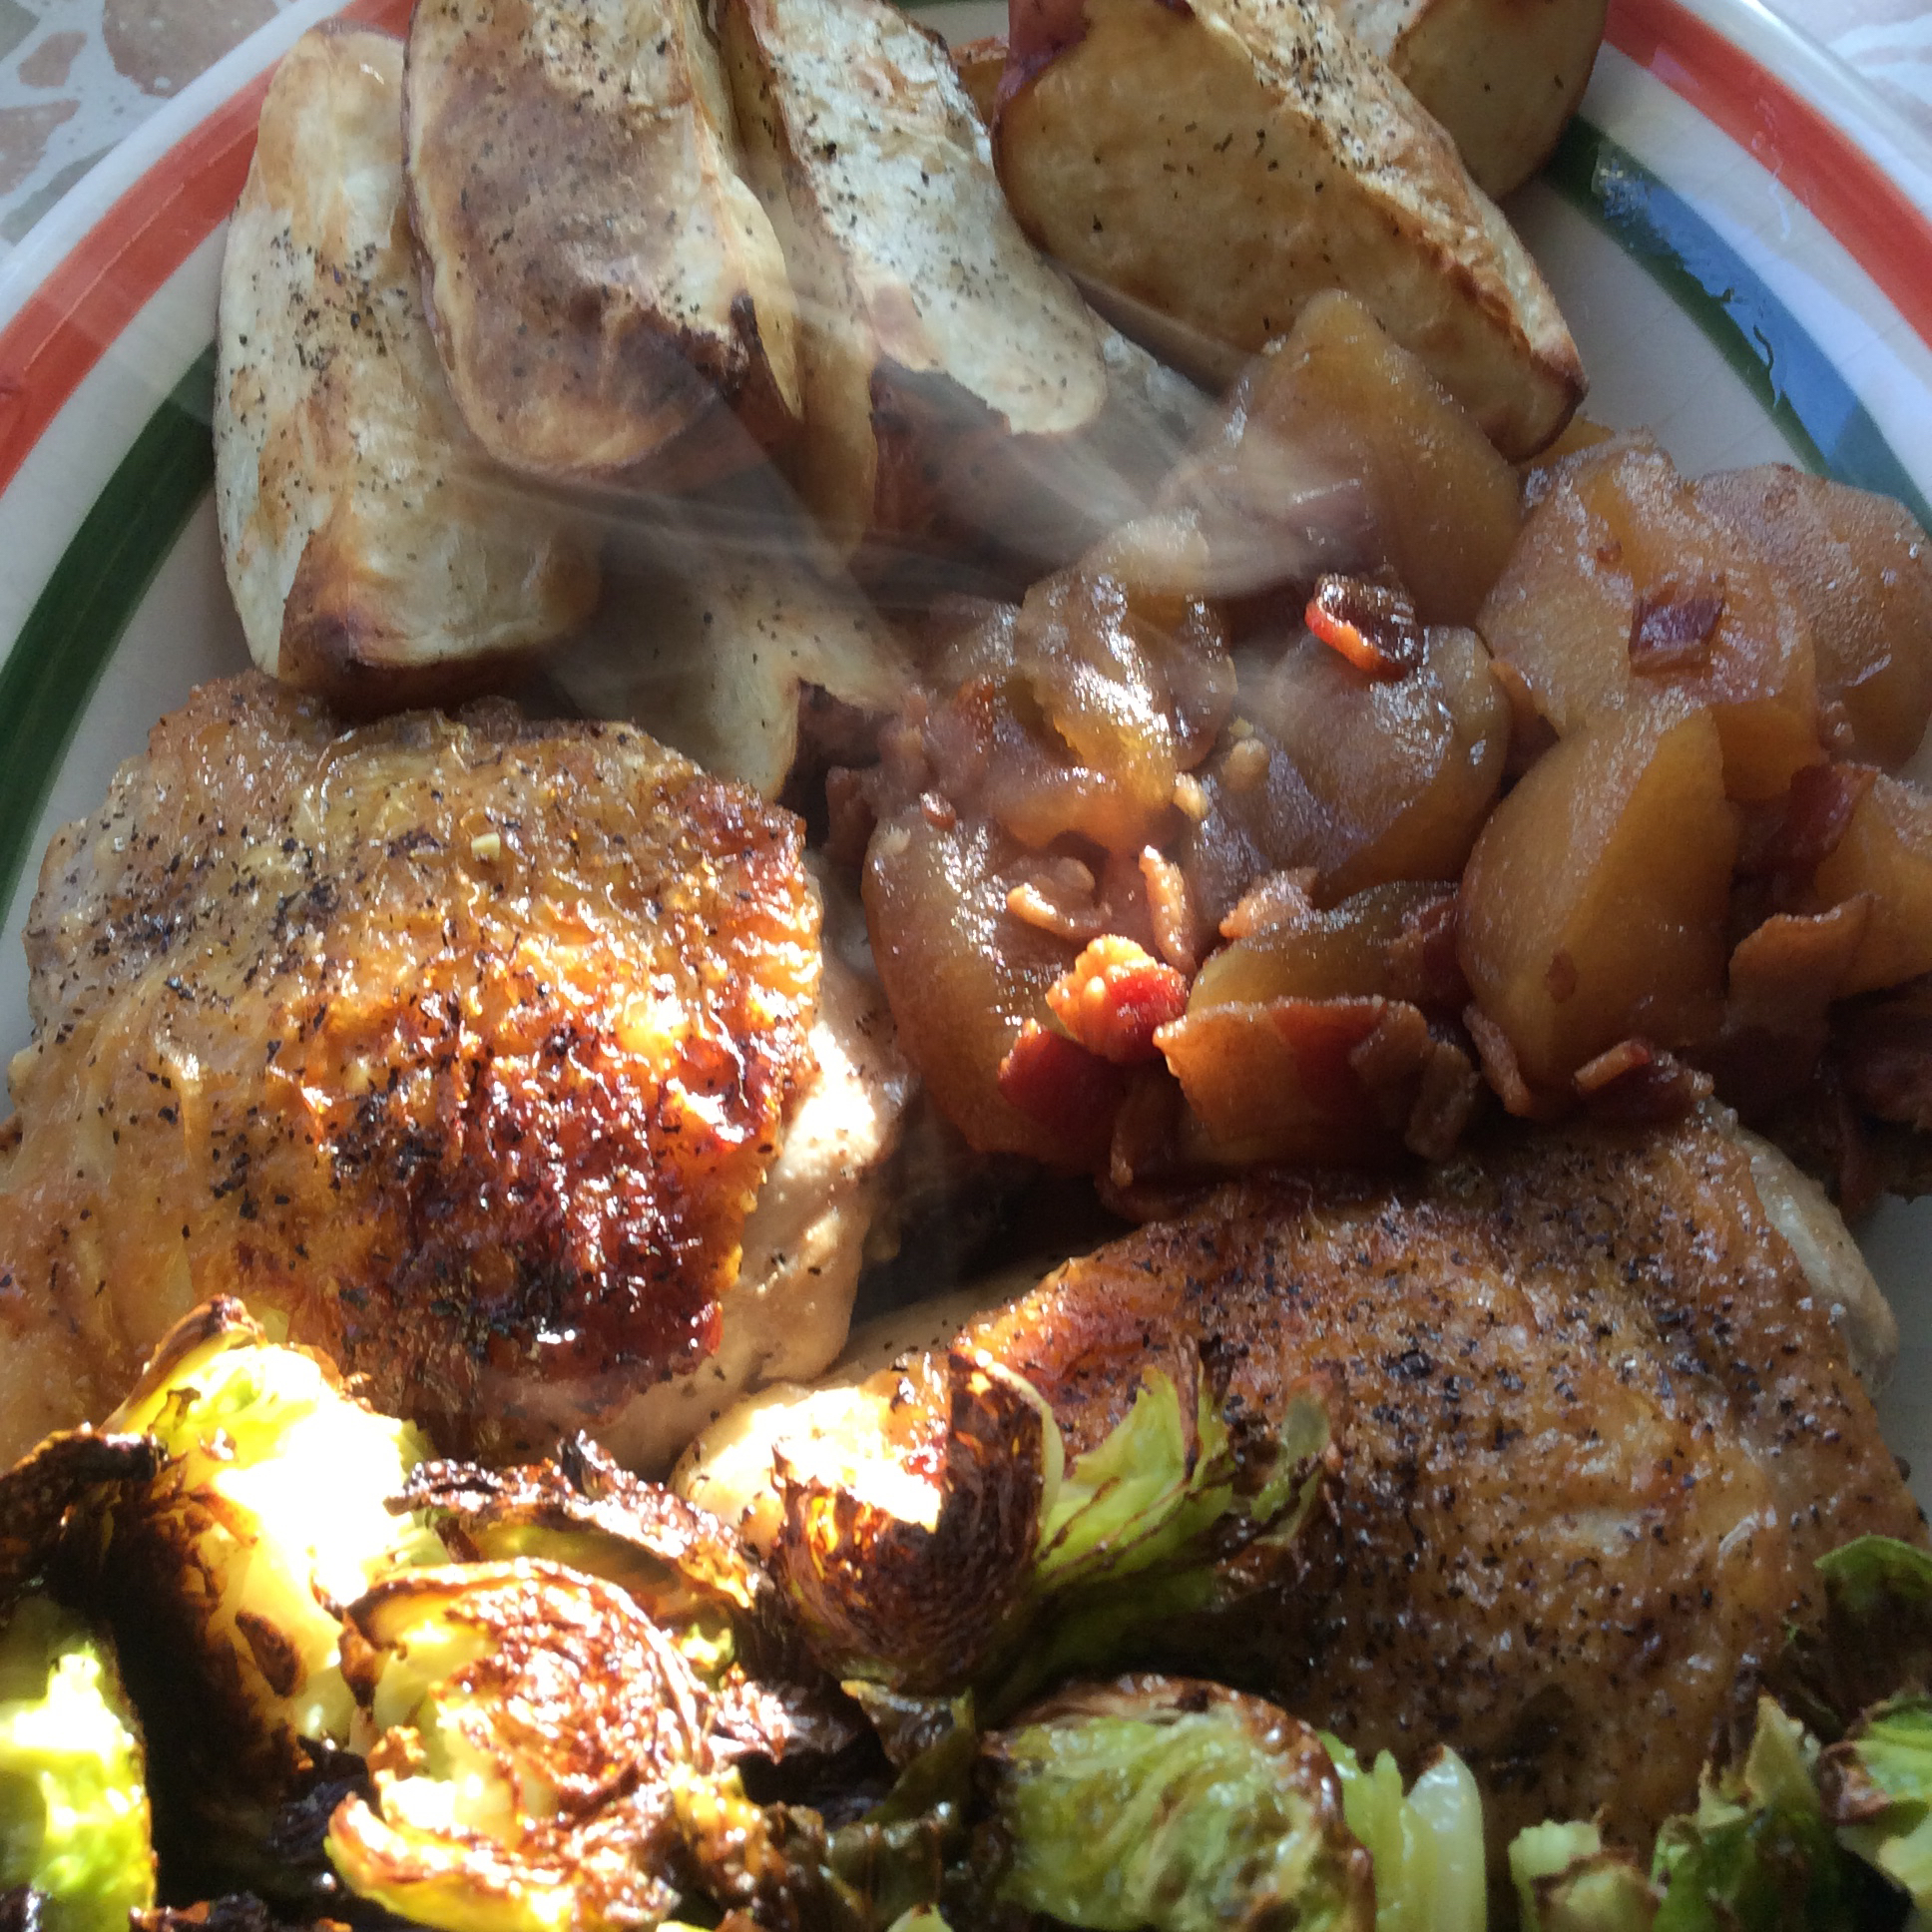 Braised Chicken Thighs with Apples, Bacon Chutney, and Roasted Red Potatoes